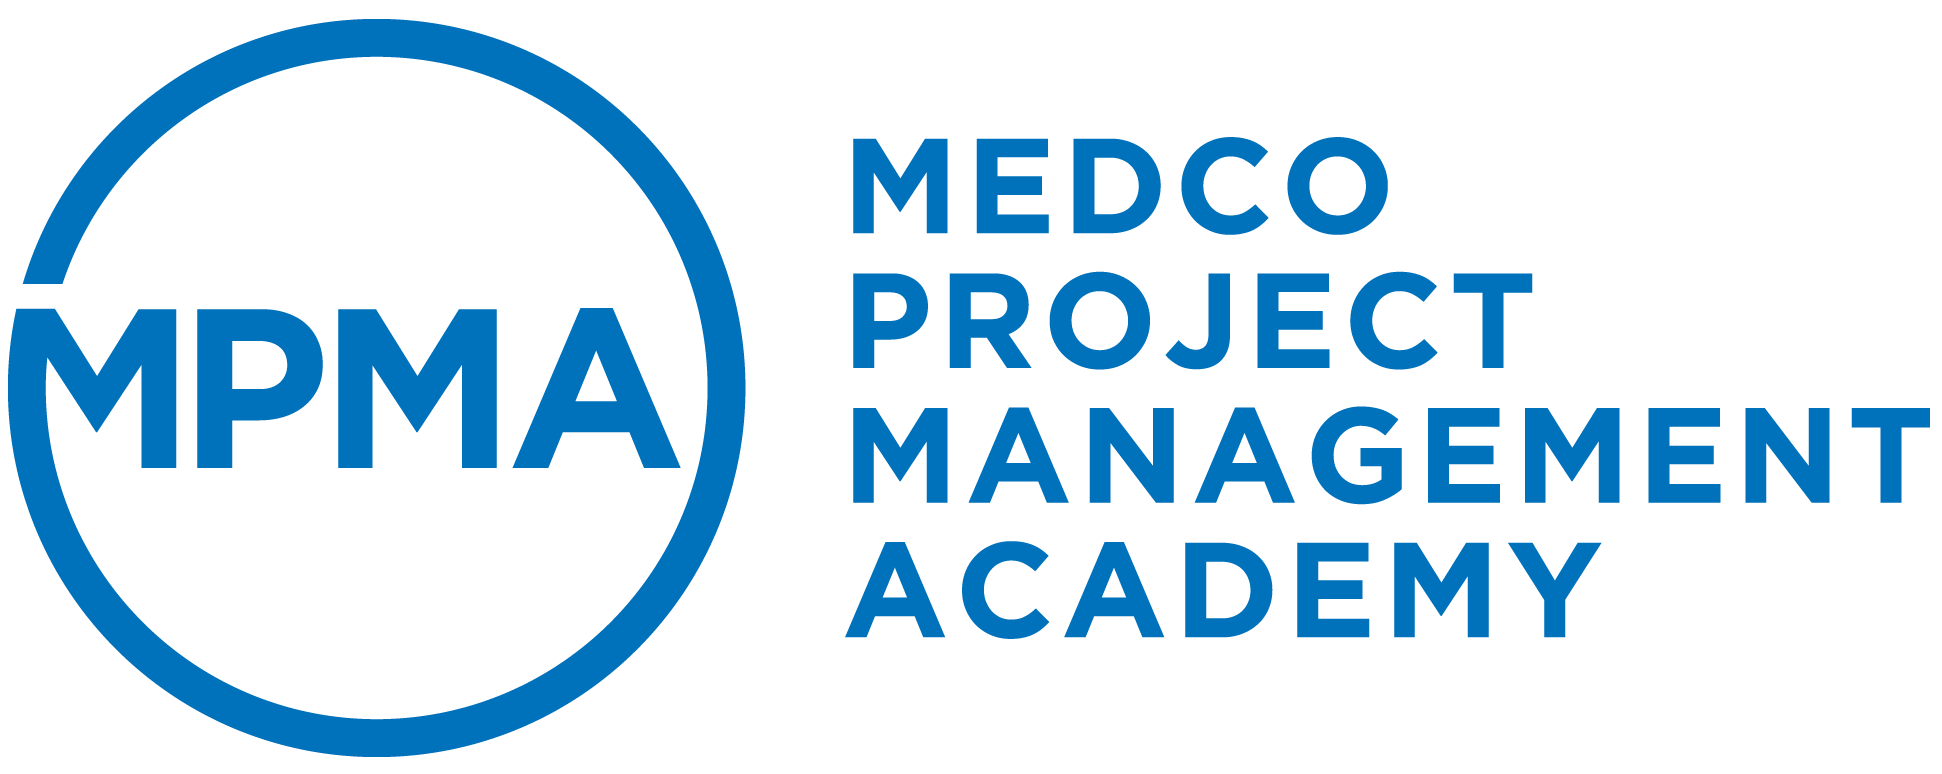 Medco Project Management Academy